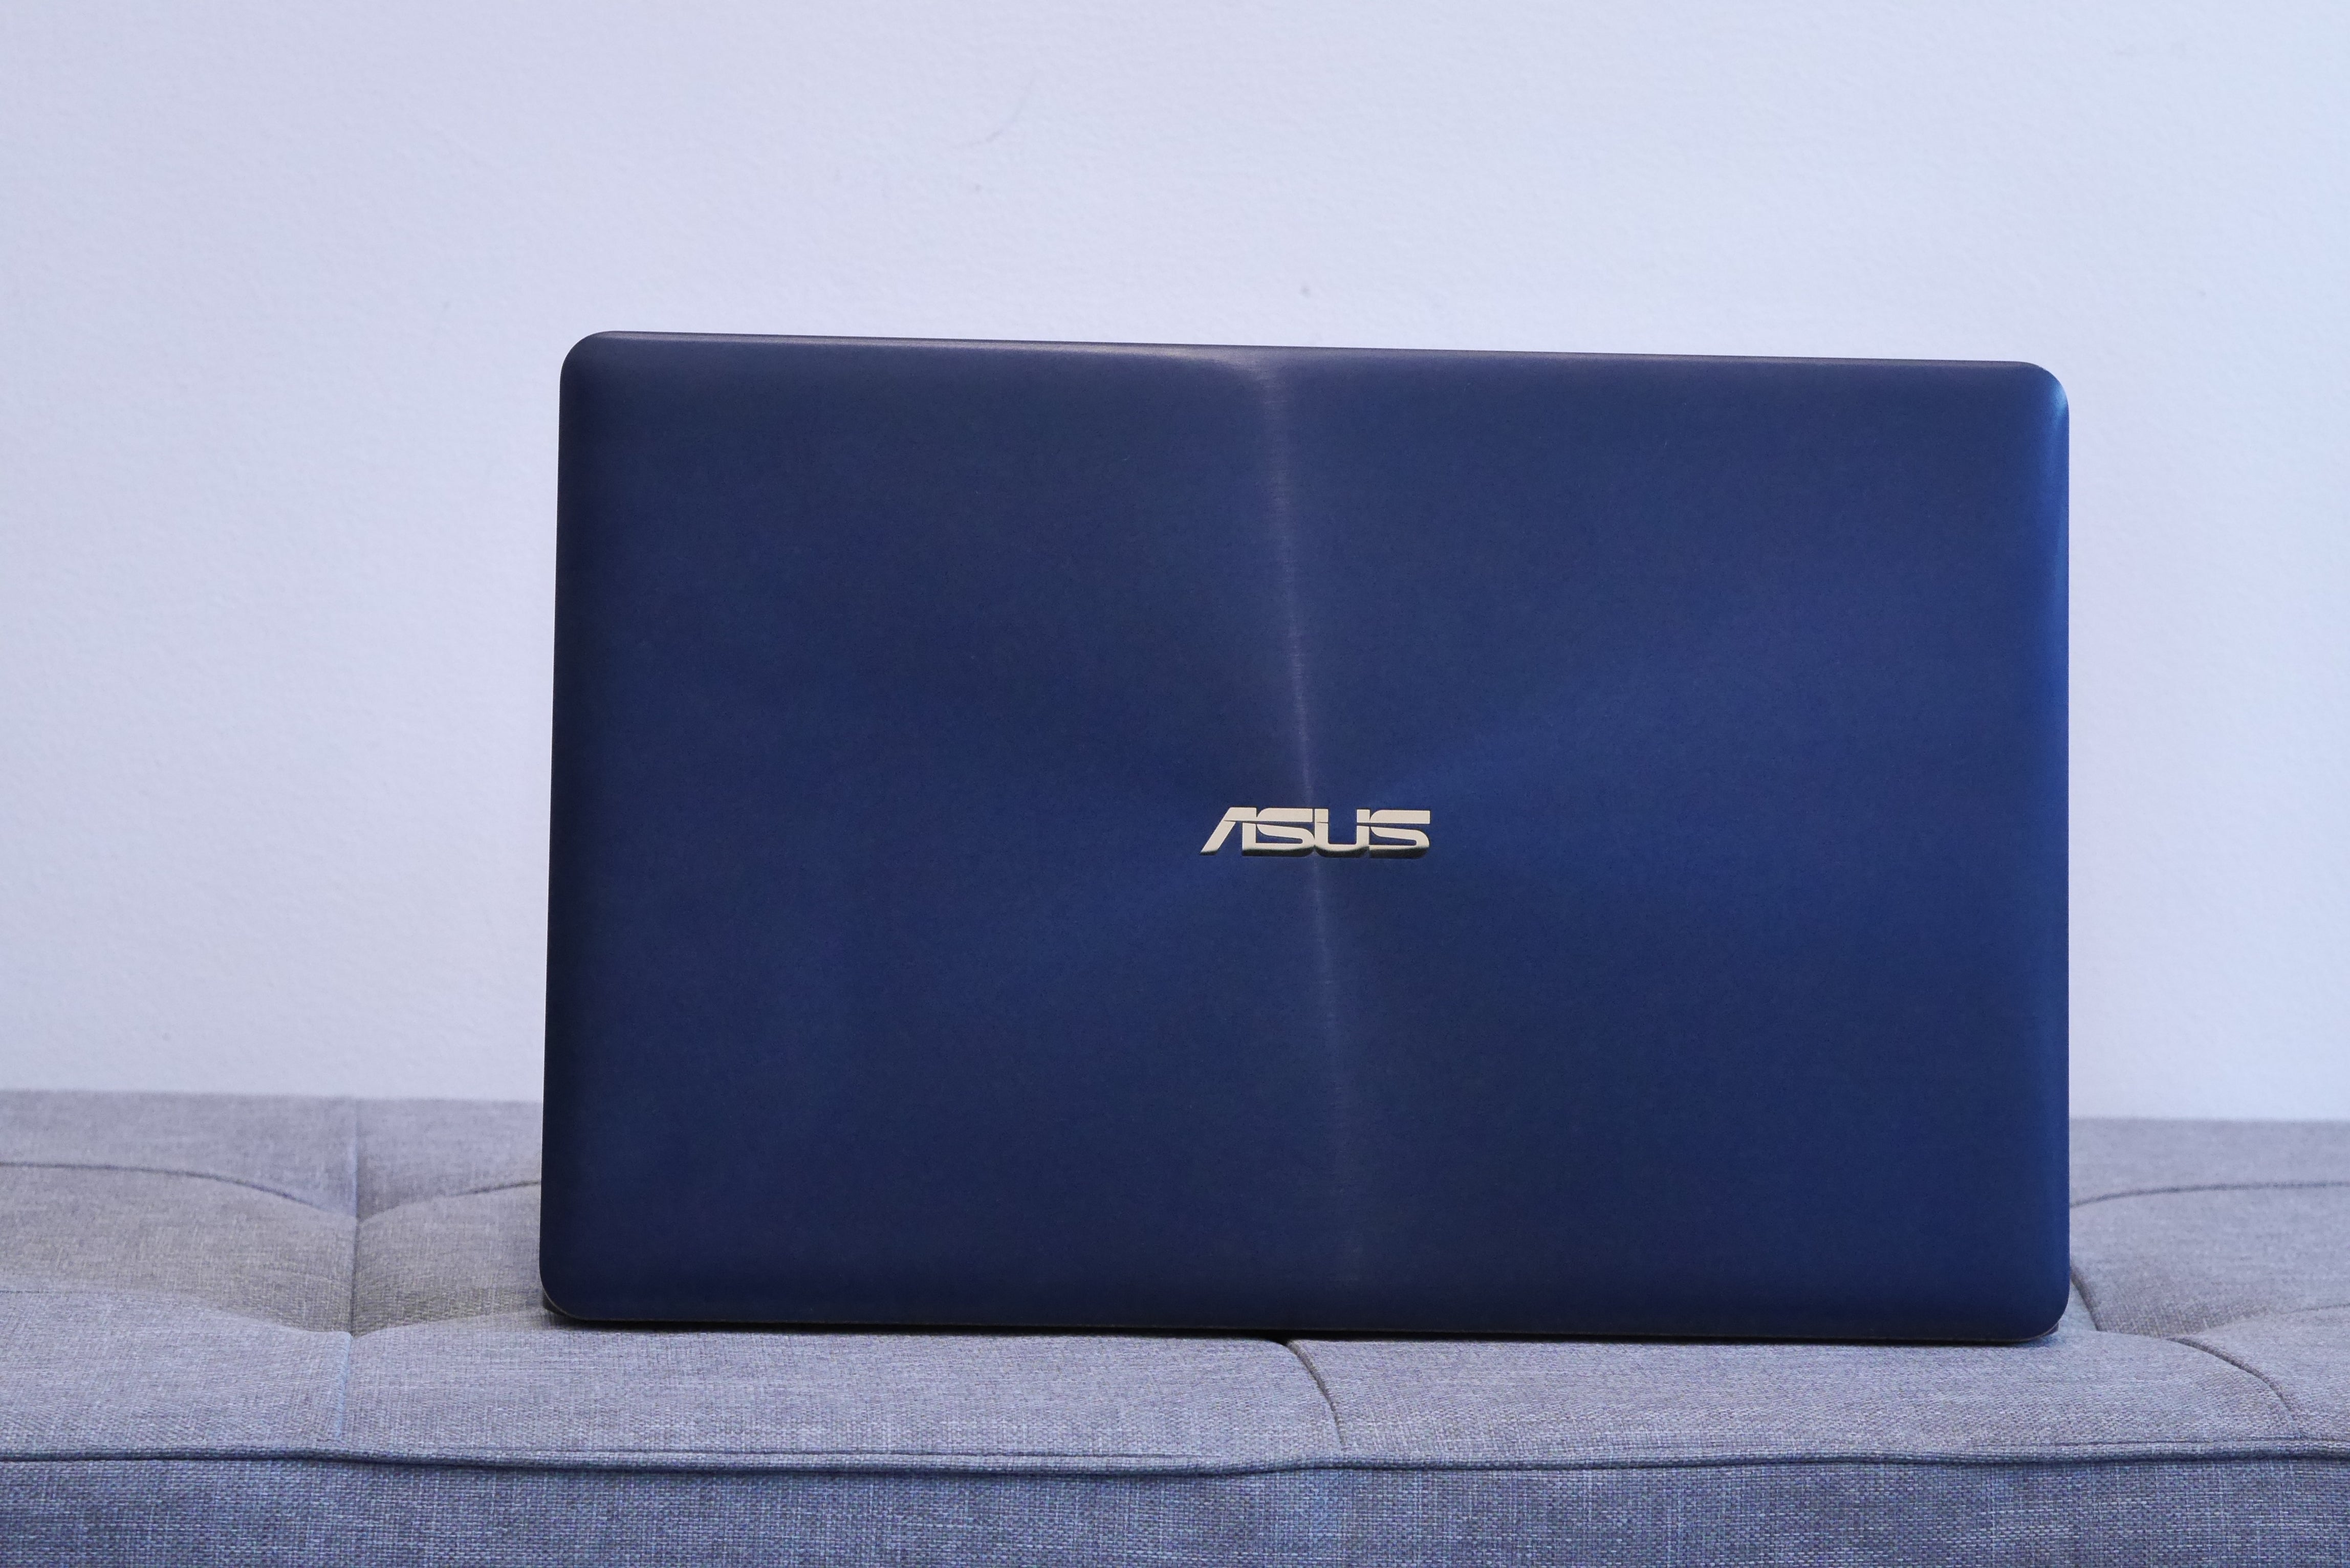 Asus ZenBook 3 Deluxe UX490UA laptop closed on couch.